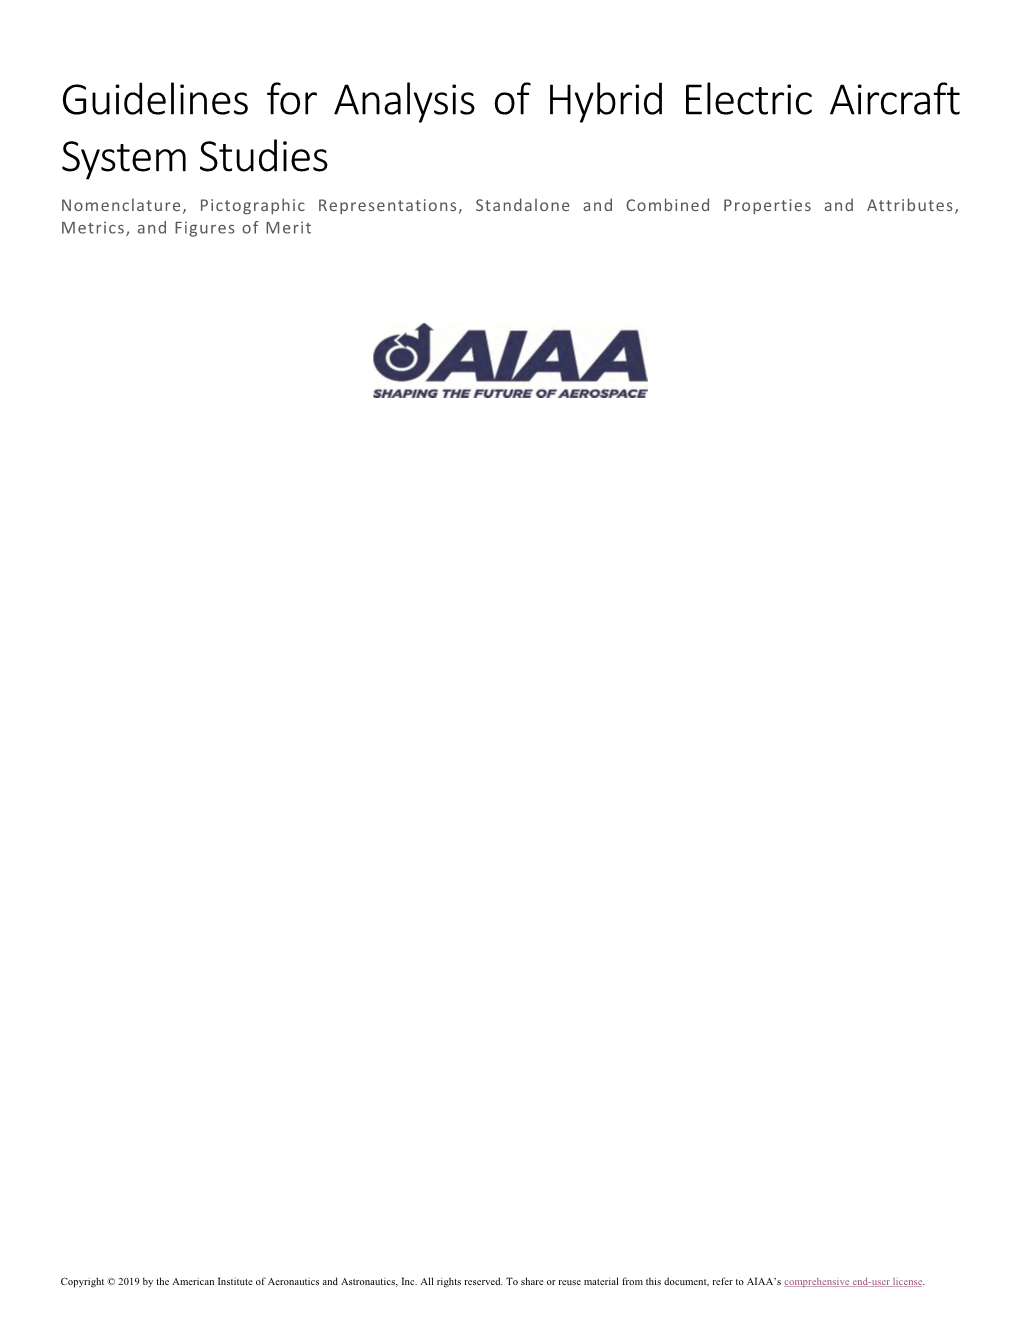 Guidelines for Analysis of Hybrid Electric Aircraft System Studies